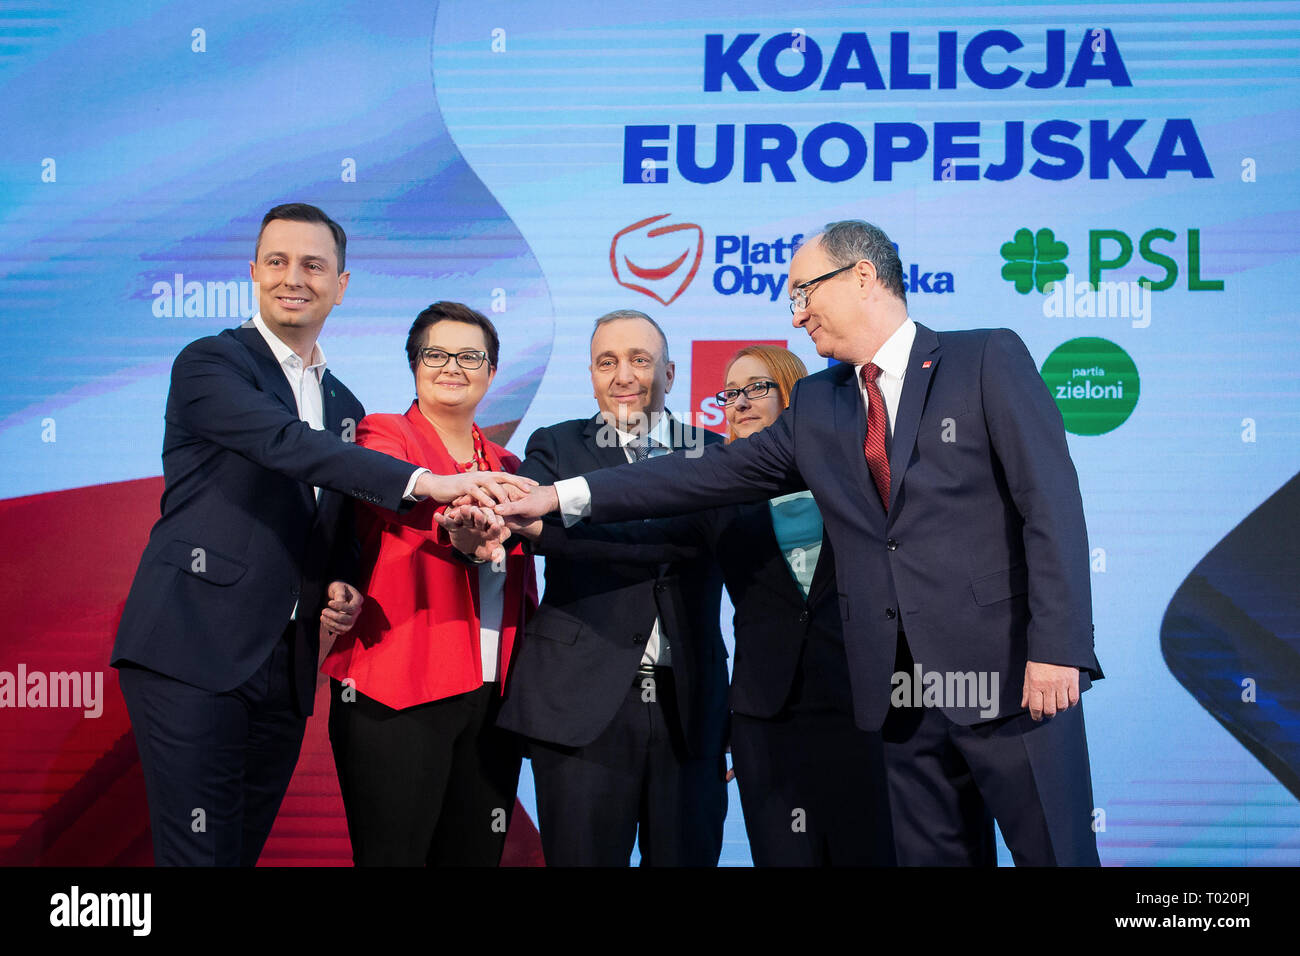 Wladyslaw Kosiniak-Kamysz, Katarzyna Lubnauer, Grzegorz Schetyna, Malgorzata Tracz and Wlodzimierz Czarzasty during a joint press conference of the ''European Coalition'' (five polish largest opposition parties) leaders in Warsaw, Poland on 24 February 2019. Five Polish opposition parties (Civic Platform, Modern party, Polish People’s Party, Democratic Left Alliance and Poland’s Greens) on Sunday signed a coalition declaration, ahead of the upcoming European Parliament Elections, and created initiative billed as the European Coalition. Stock Photo